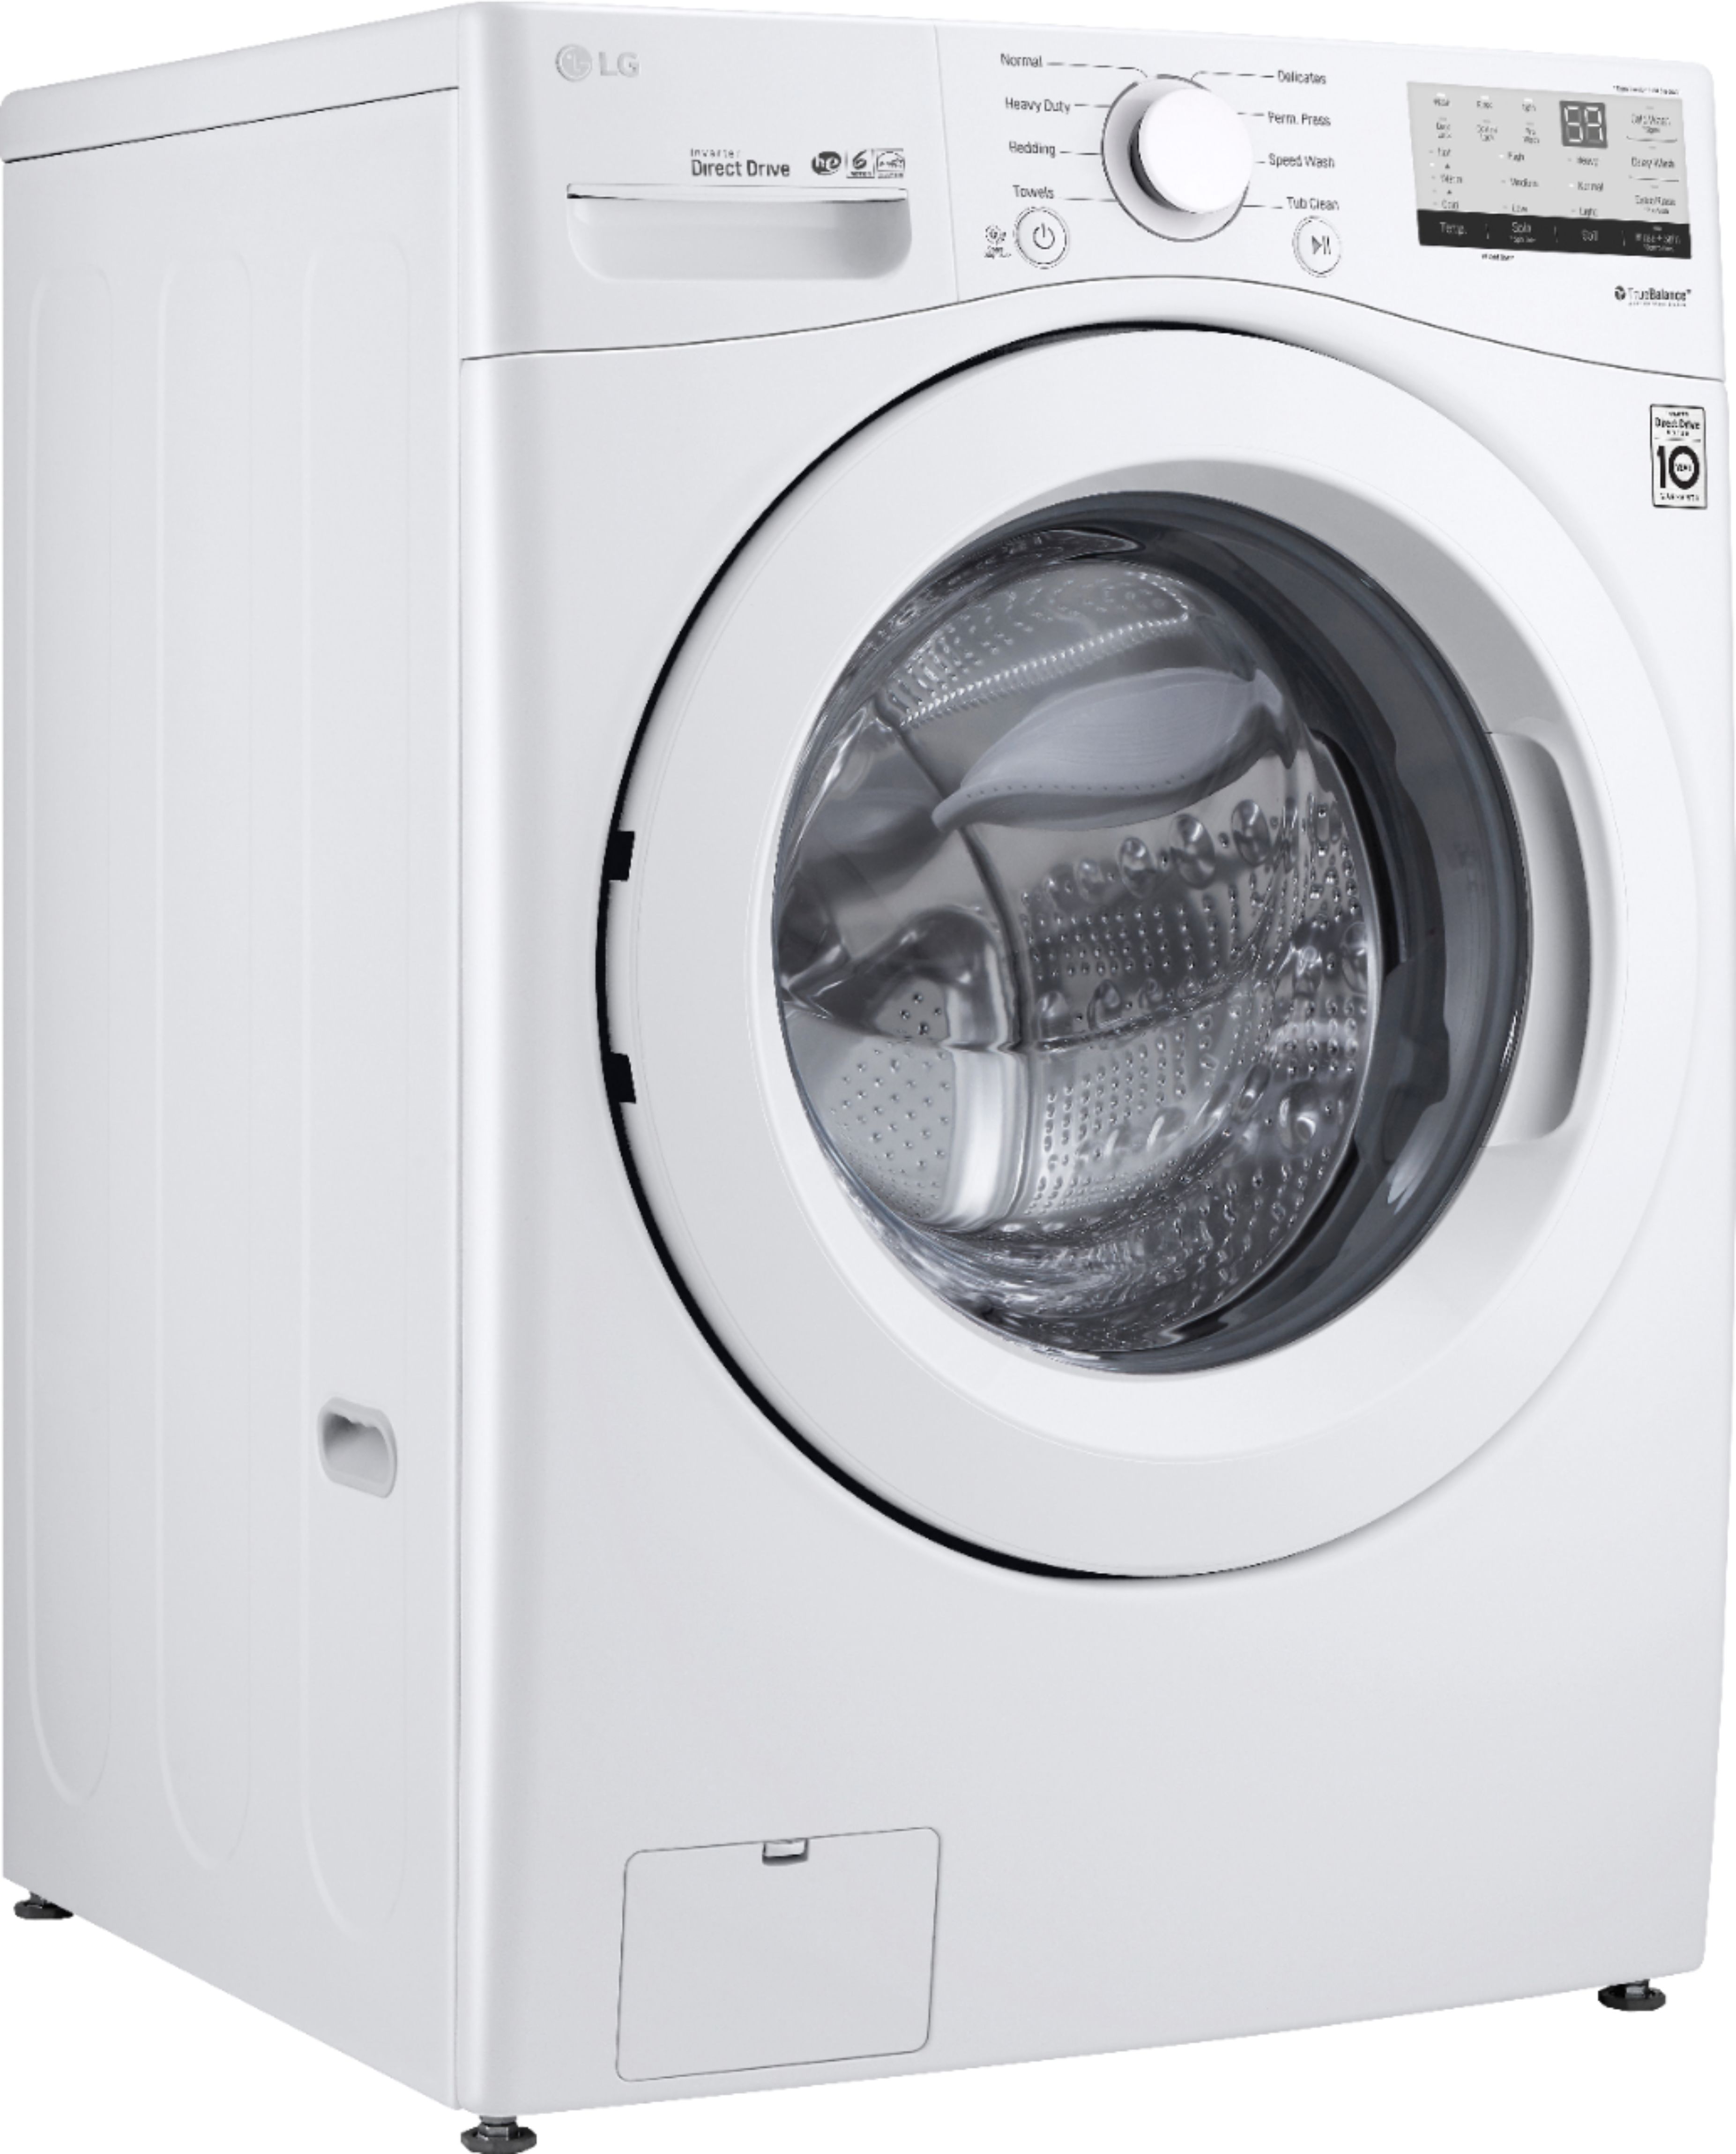 Angle View: LG - 4.5 Cu. Ft. High Efficiency Stackable Front-Load Washer with 6Motion Technology - White